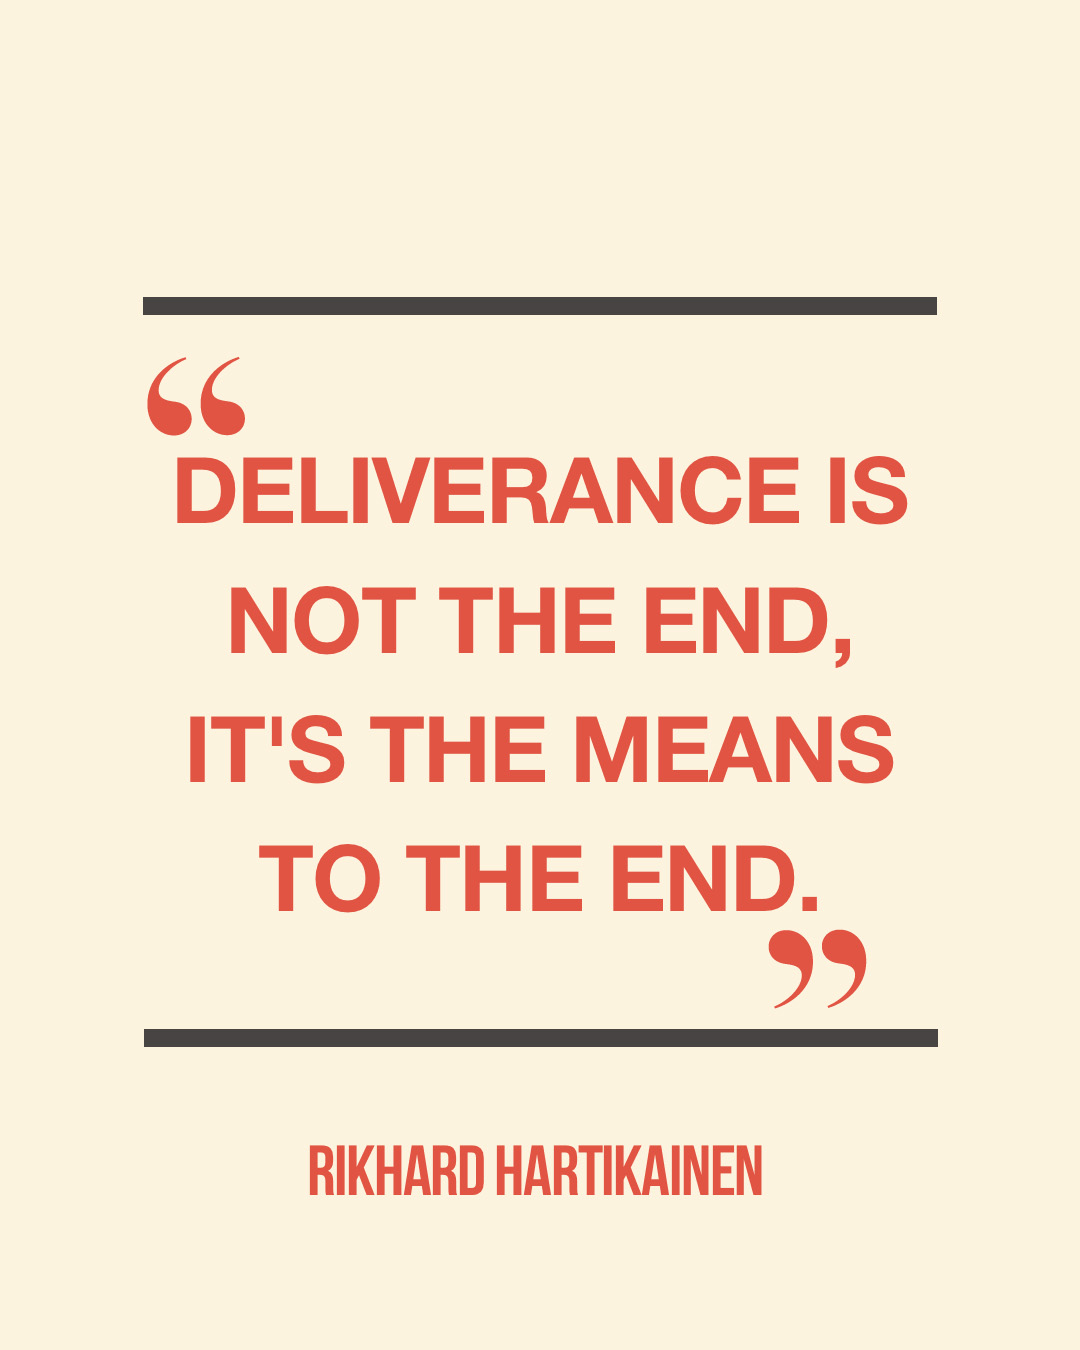 Shareable Quote for “Deliverance is Final”